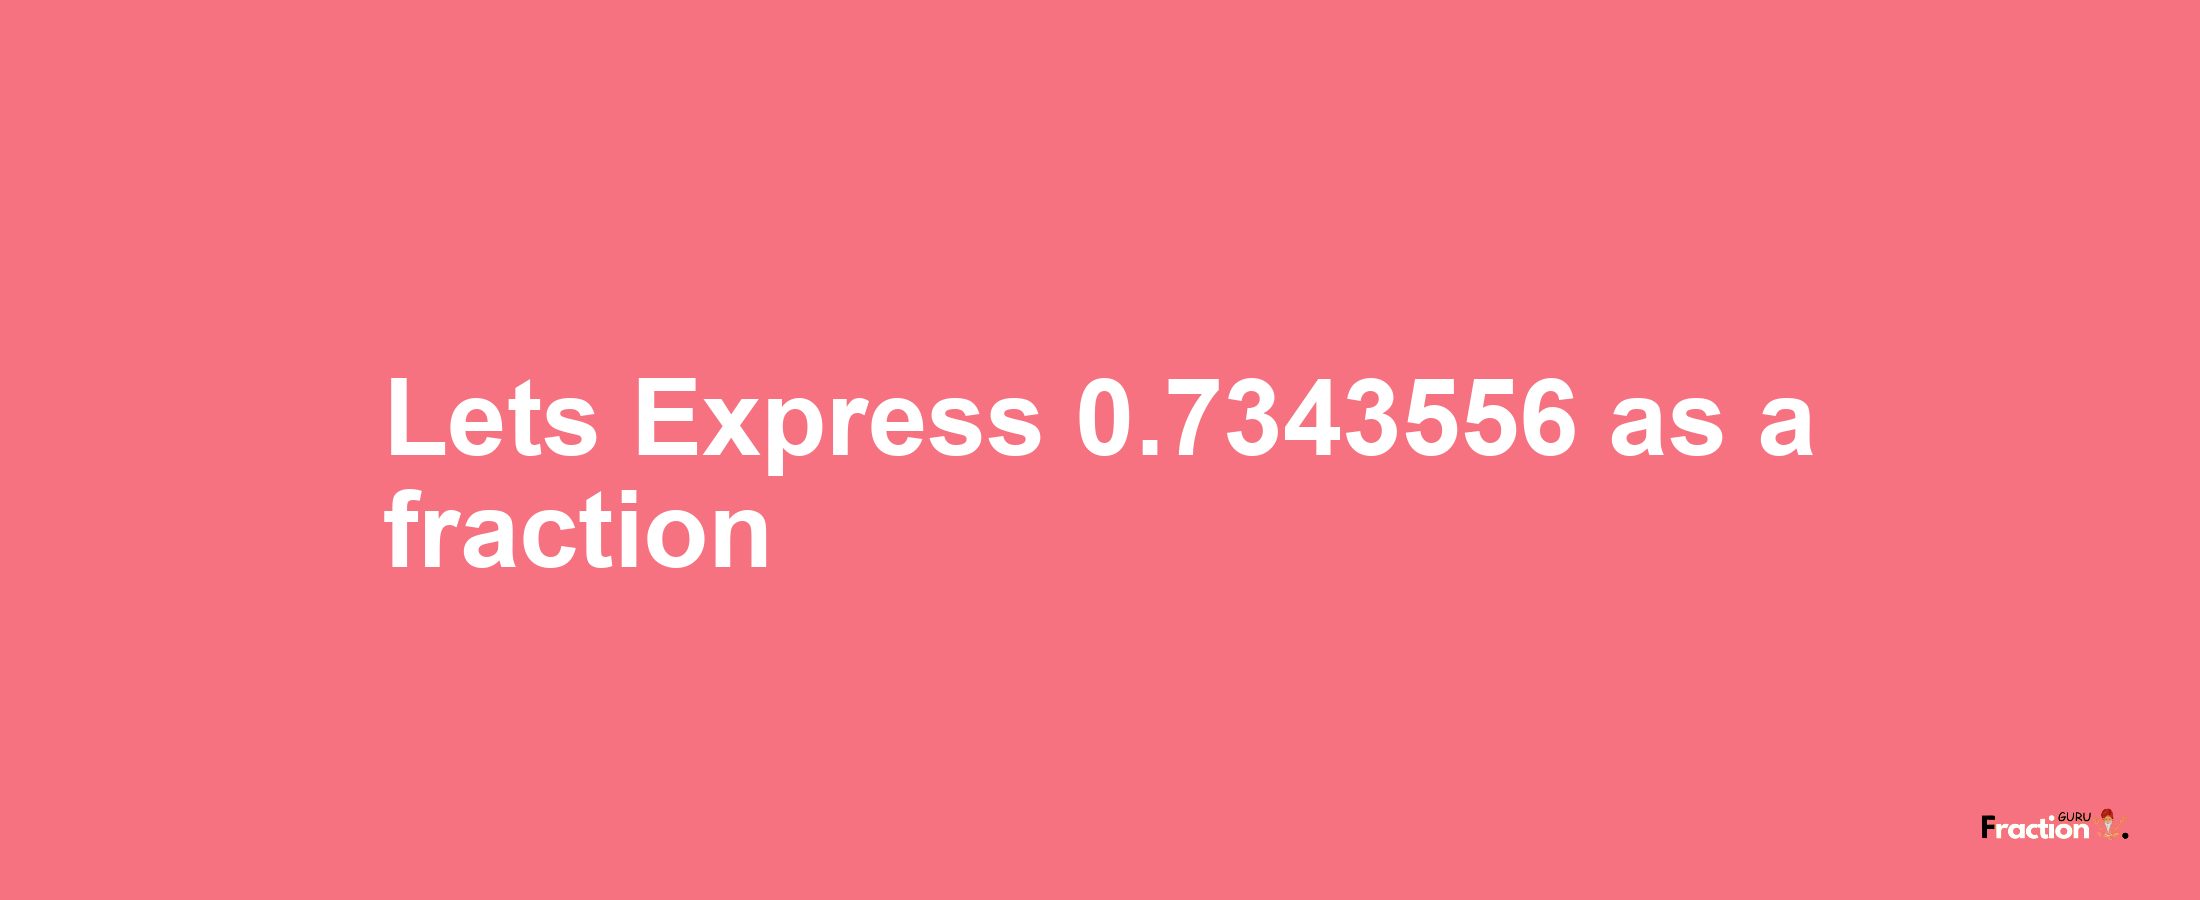 Lets Express 0.7343556 as afraction